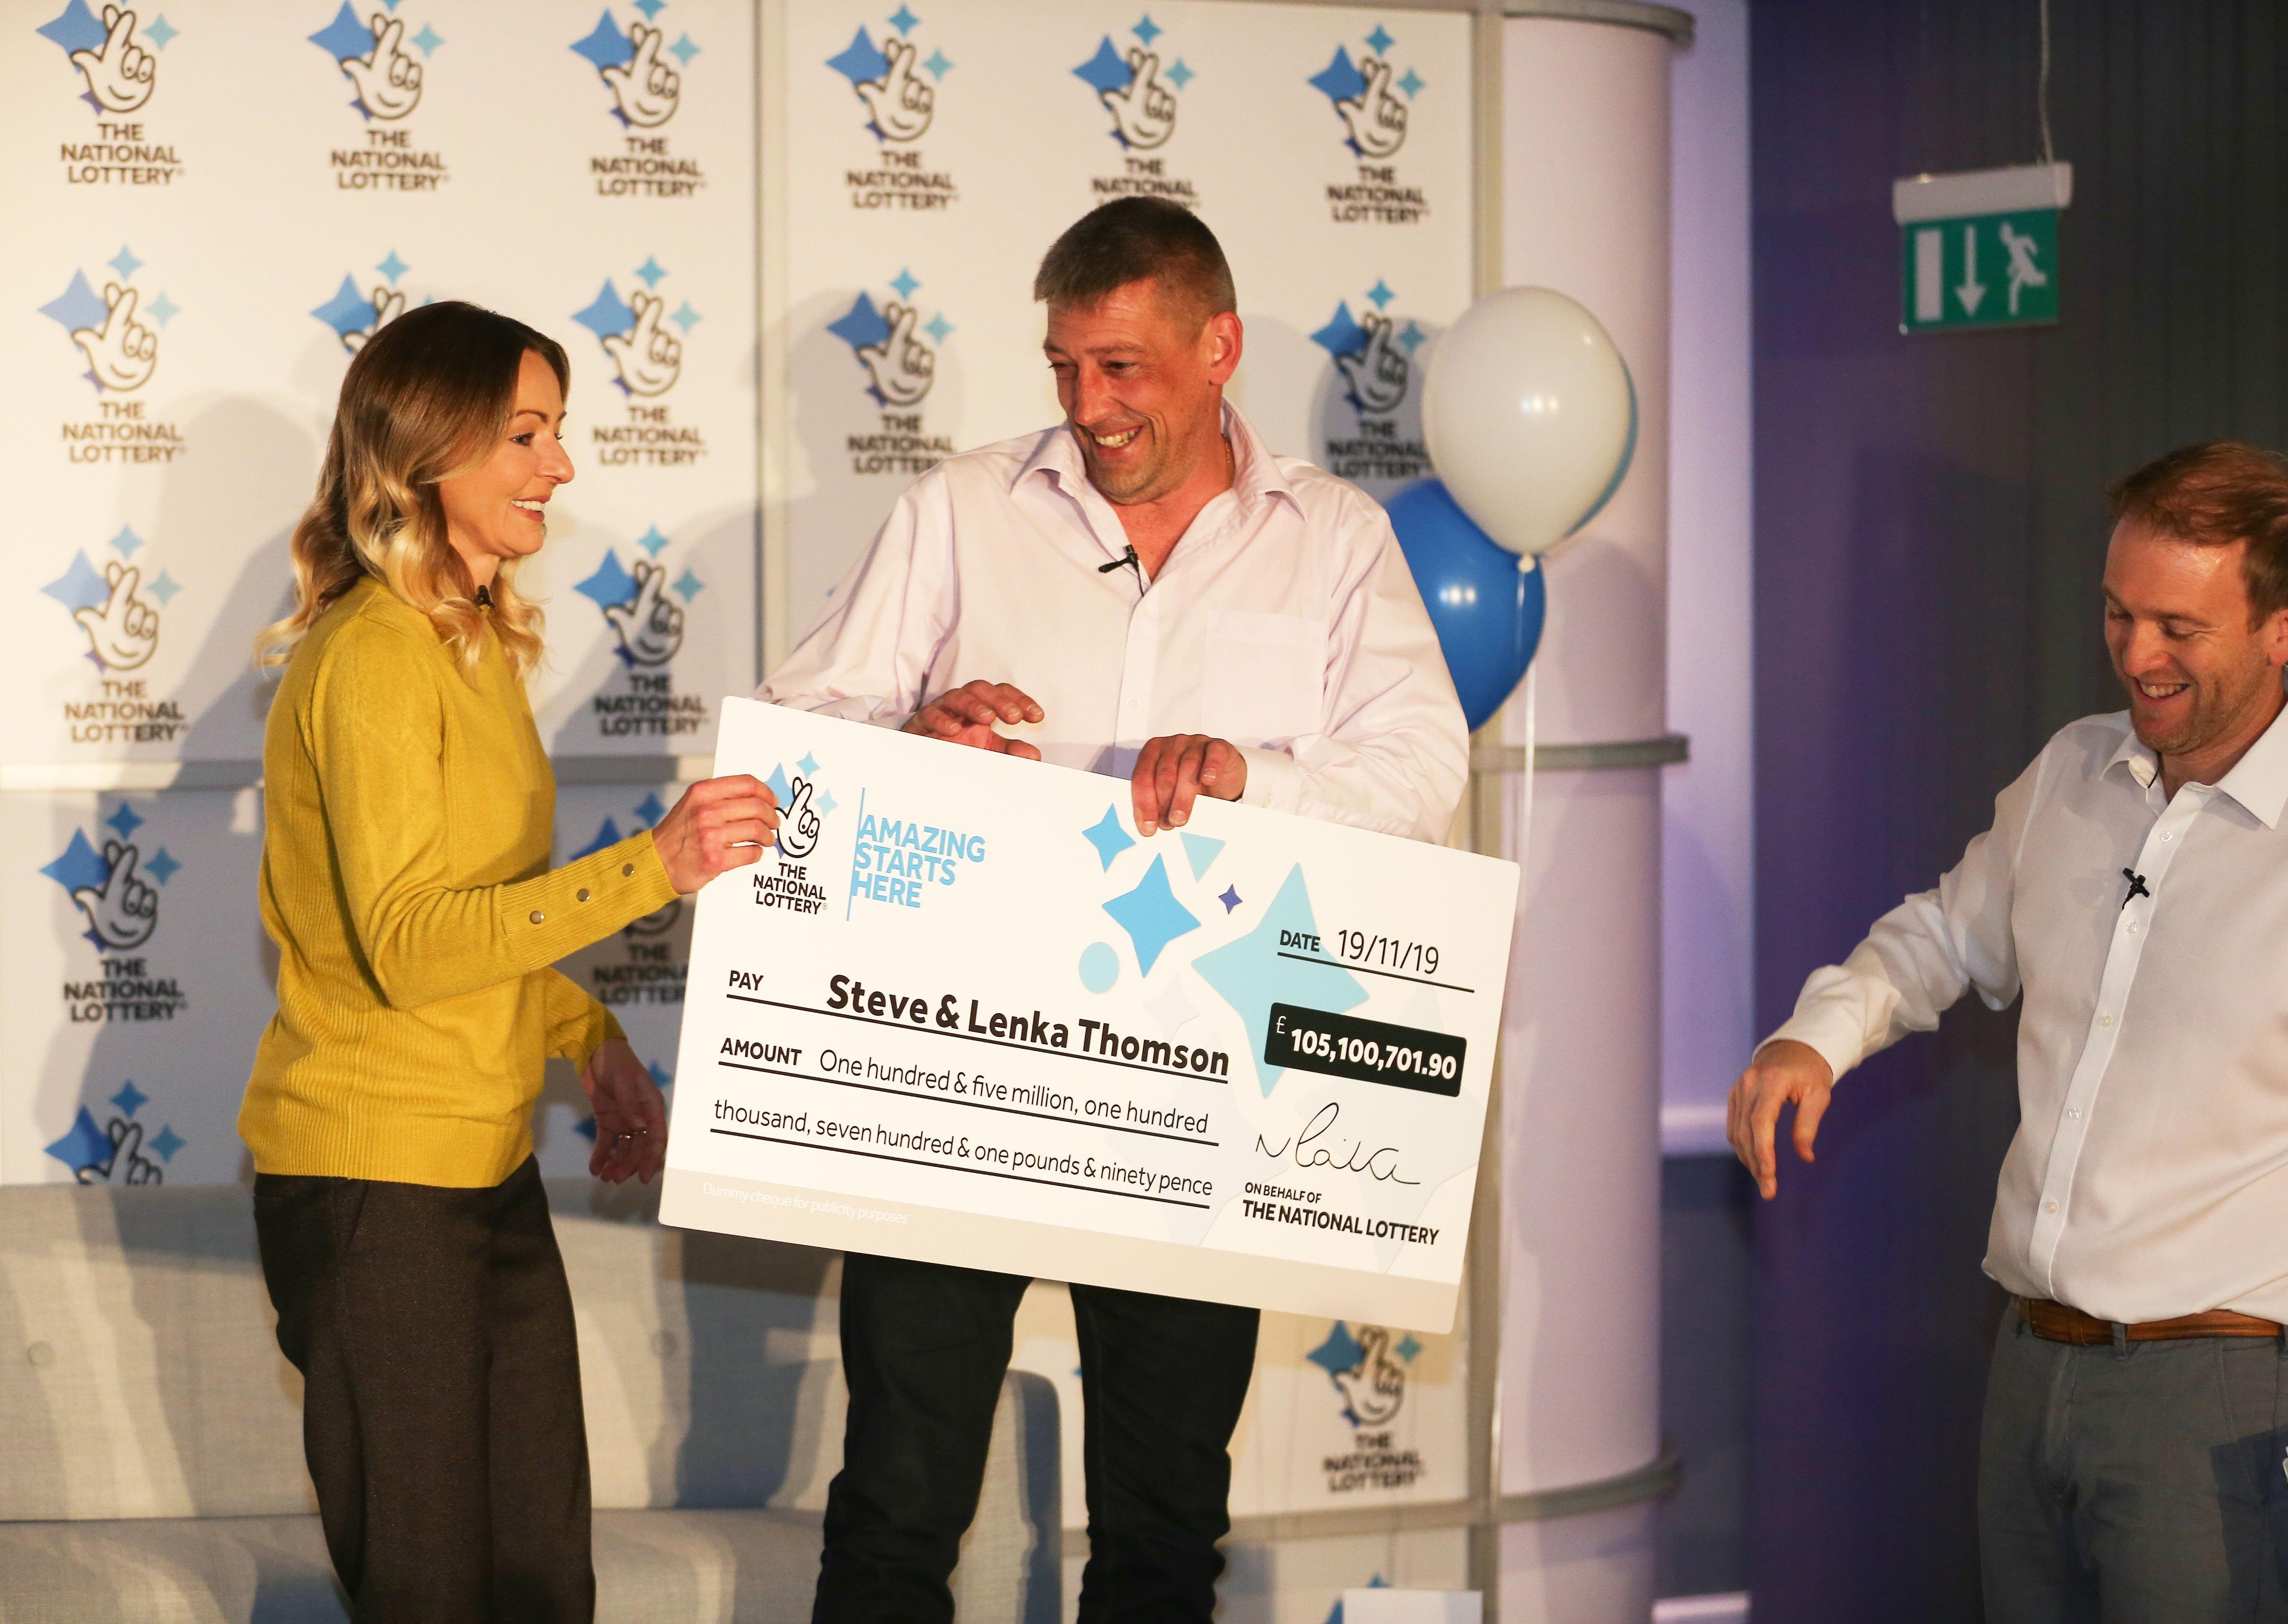 Selsey couple Steve, a 42-year-old builder, and Lenka, a 41-year-old shopworker, have won £105,100,701.90